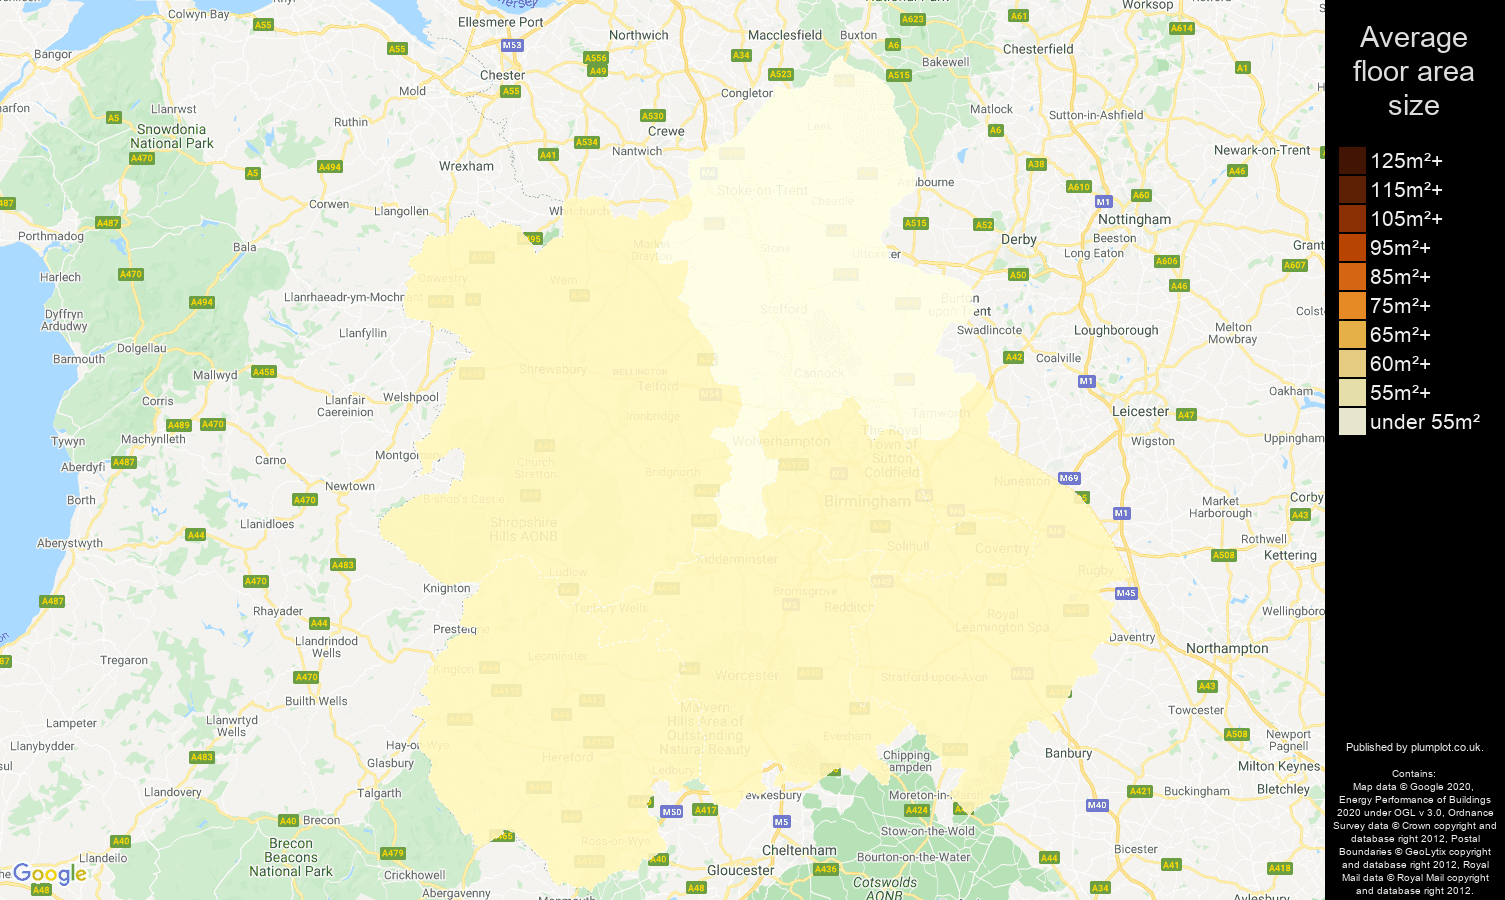 West Midlands map of average floor area size of flats